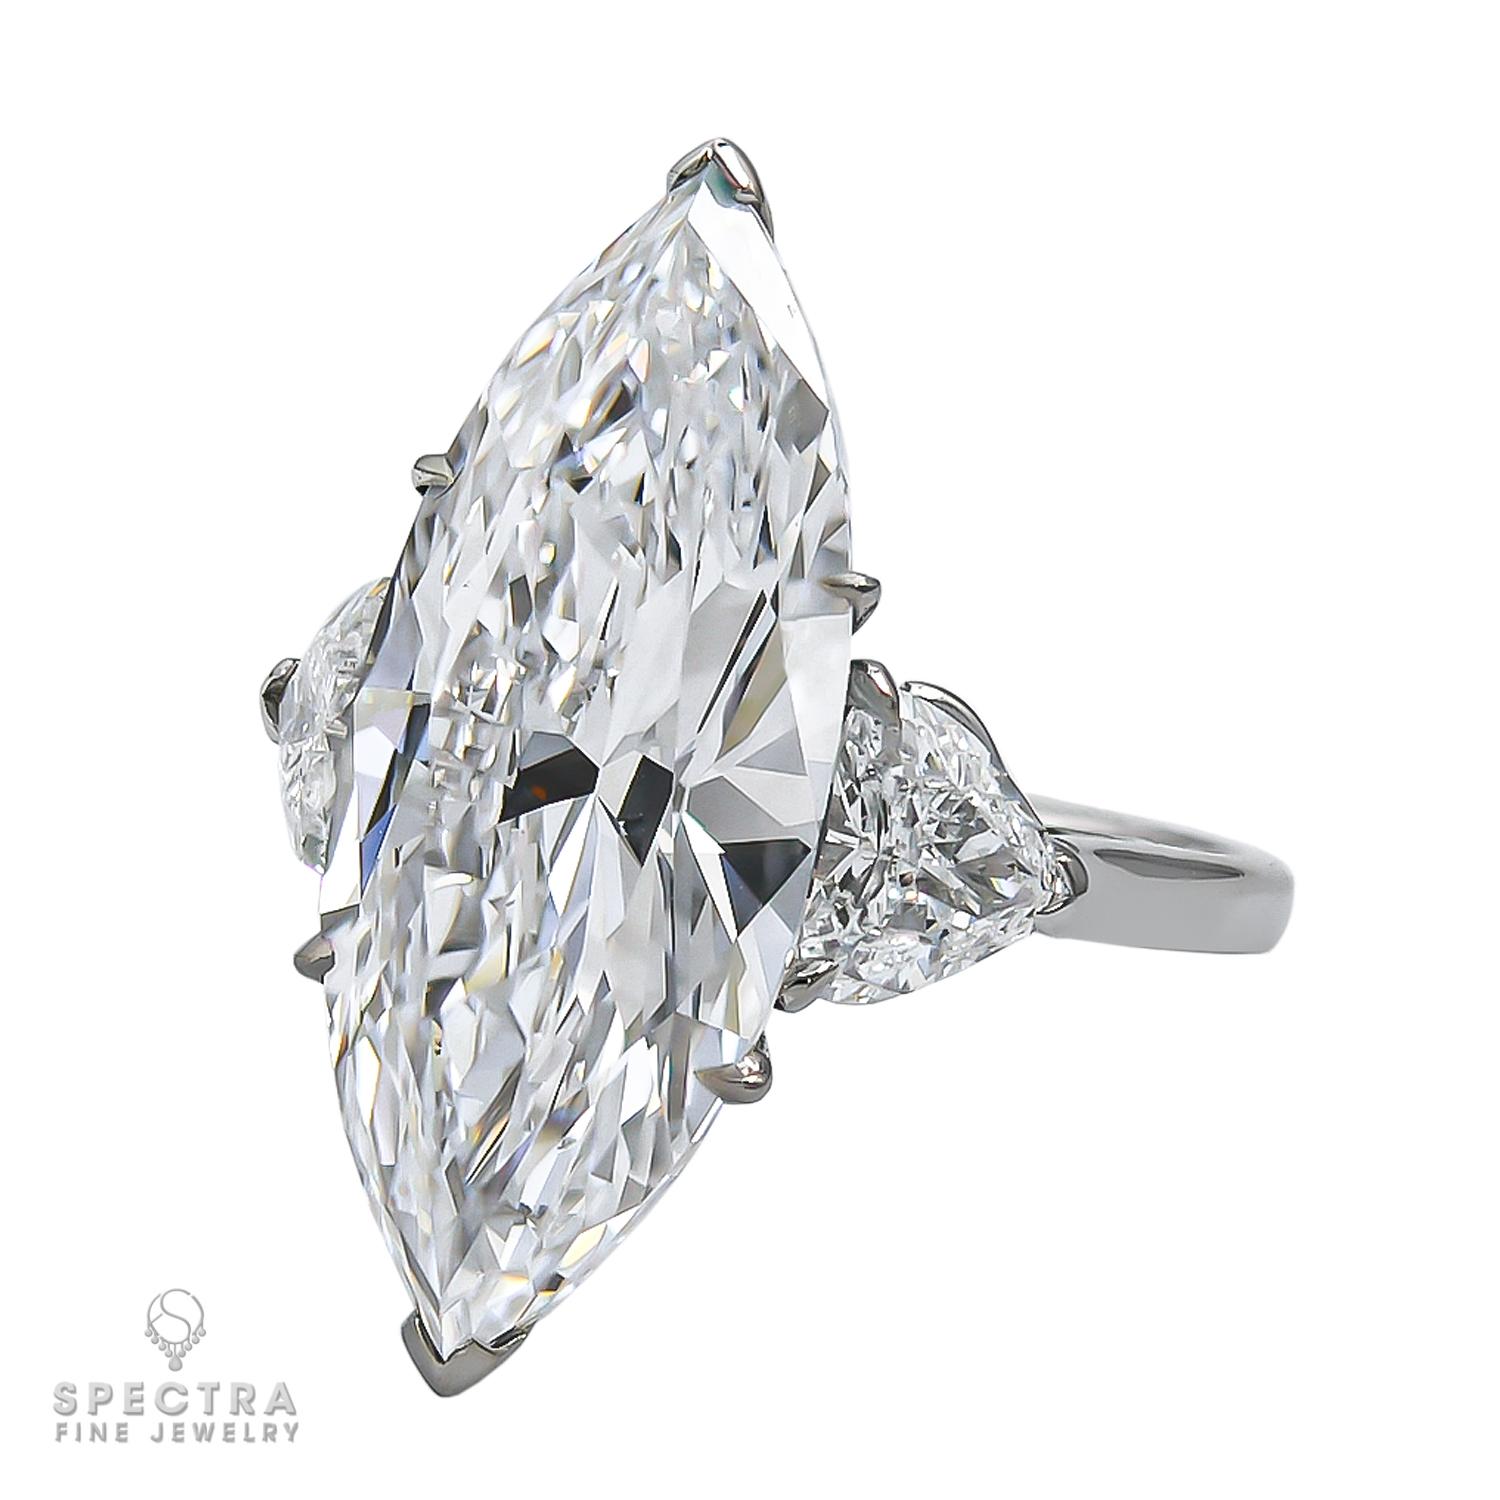 This Signed Adler Marquise Diamond Engagement Ring, made in England in the 21st century, circa 2000s, is crafted in 18K white gold and features a marquise shape diamond with an estimated weight of 10.04 carats. Adler is a noted fine jewelry house